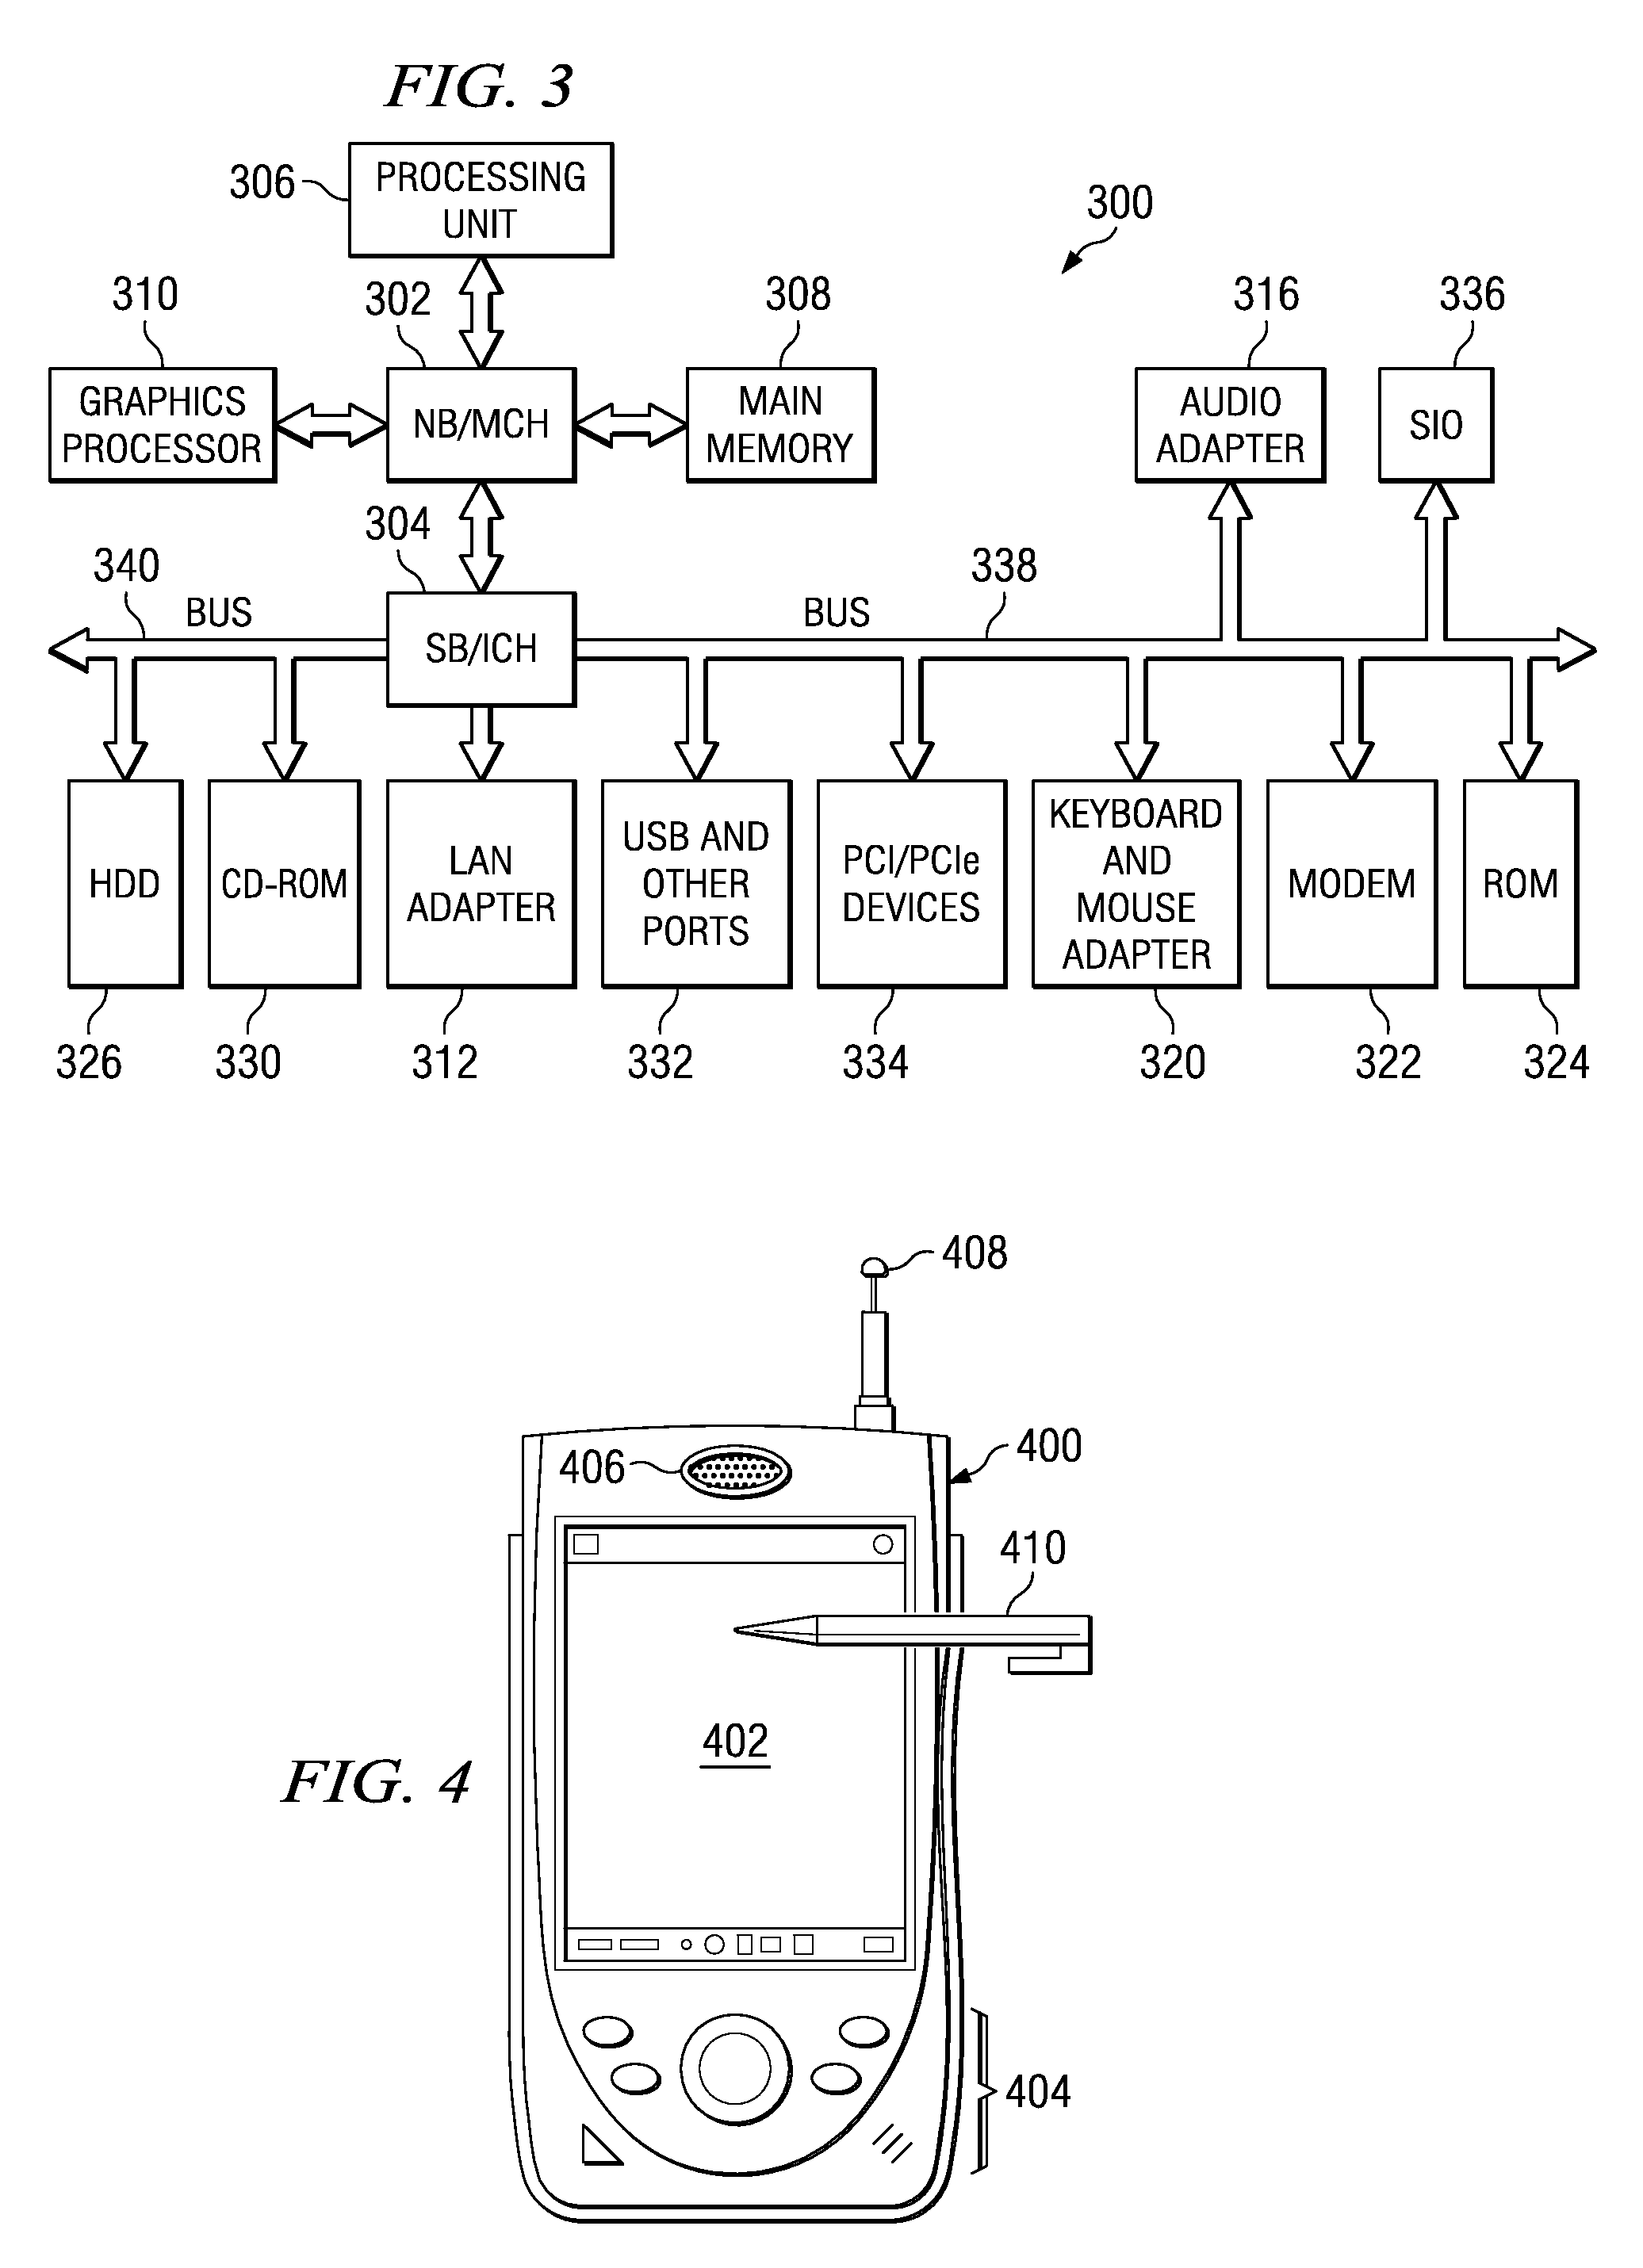 Method and apparatus for using biometric data for a customer to improve upsale and cross-sale of items